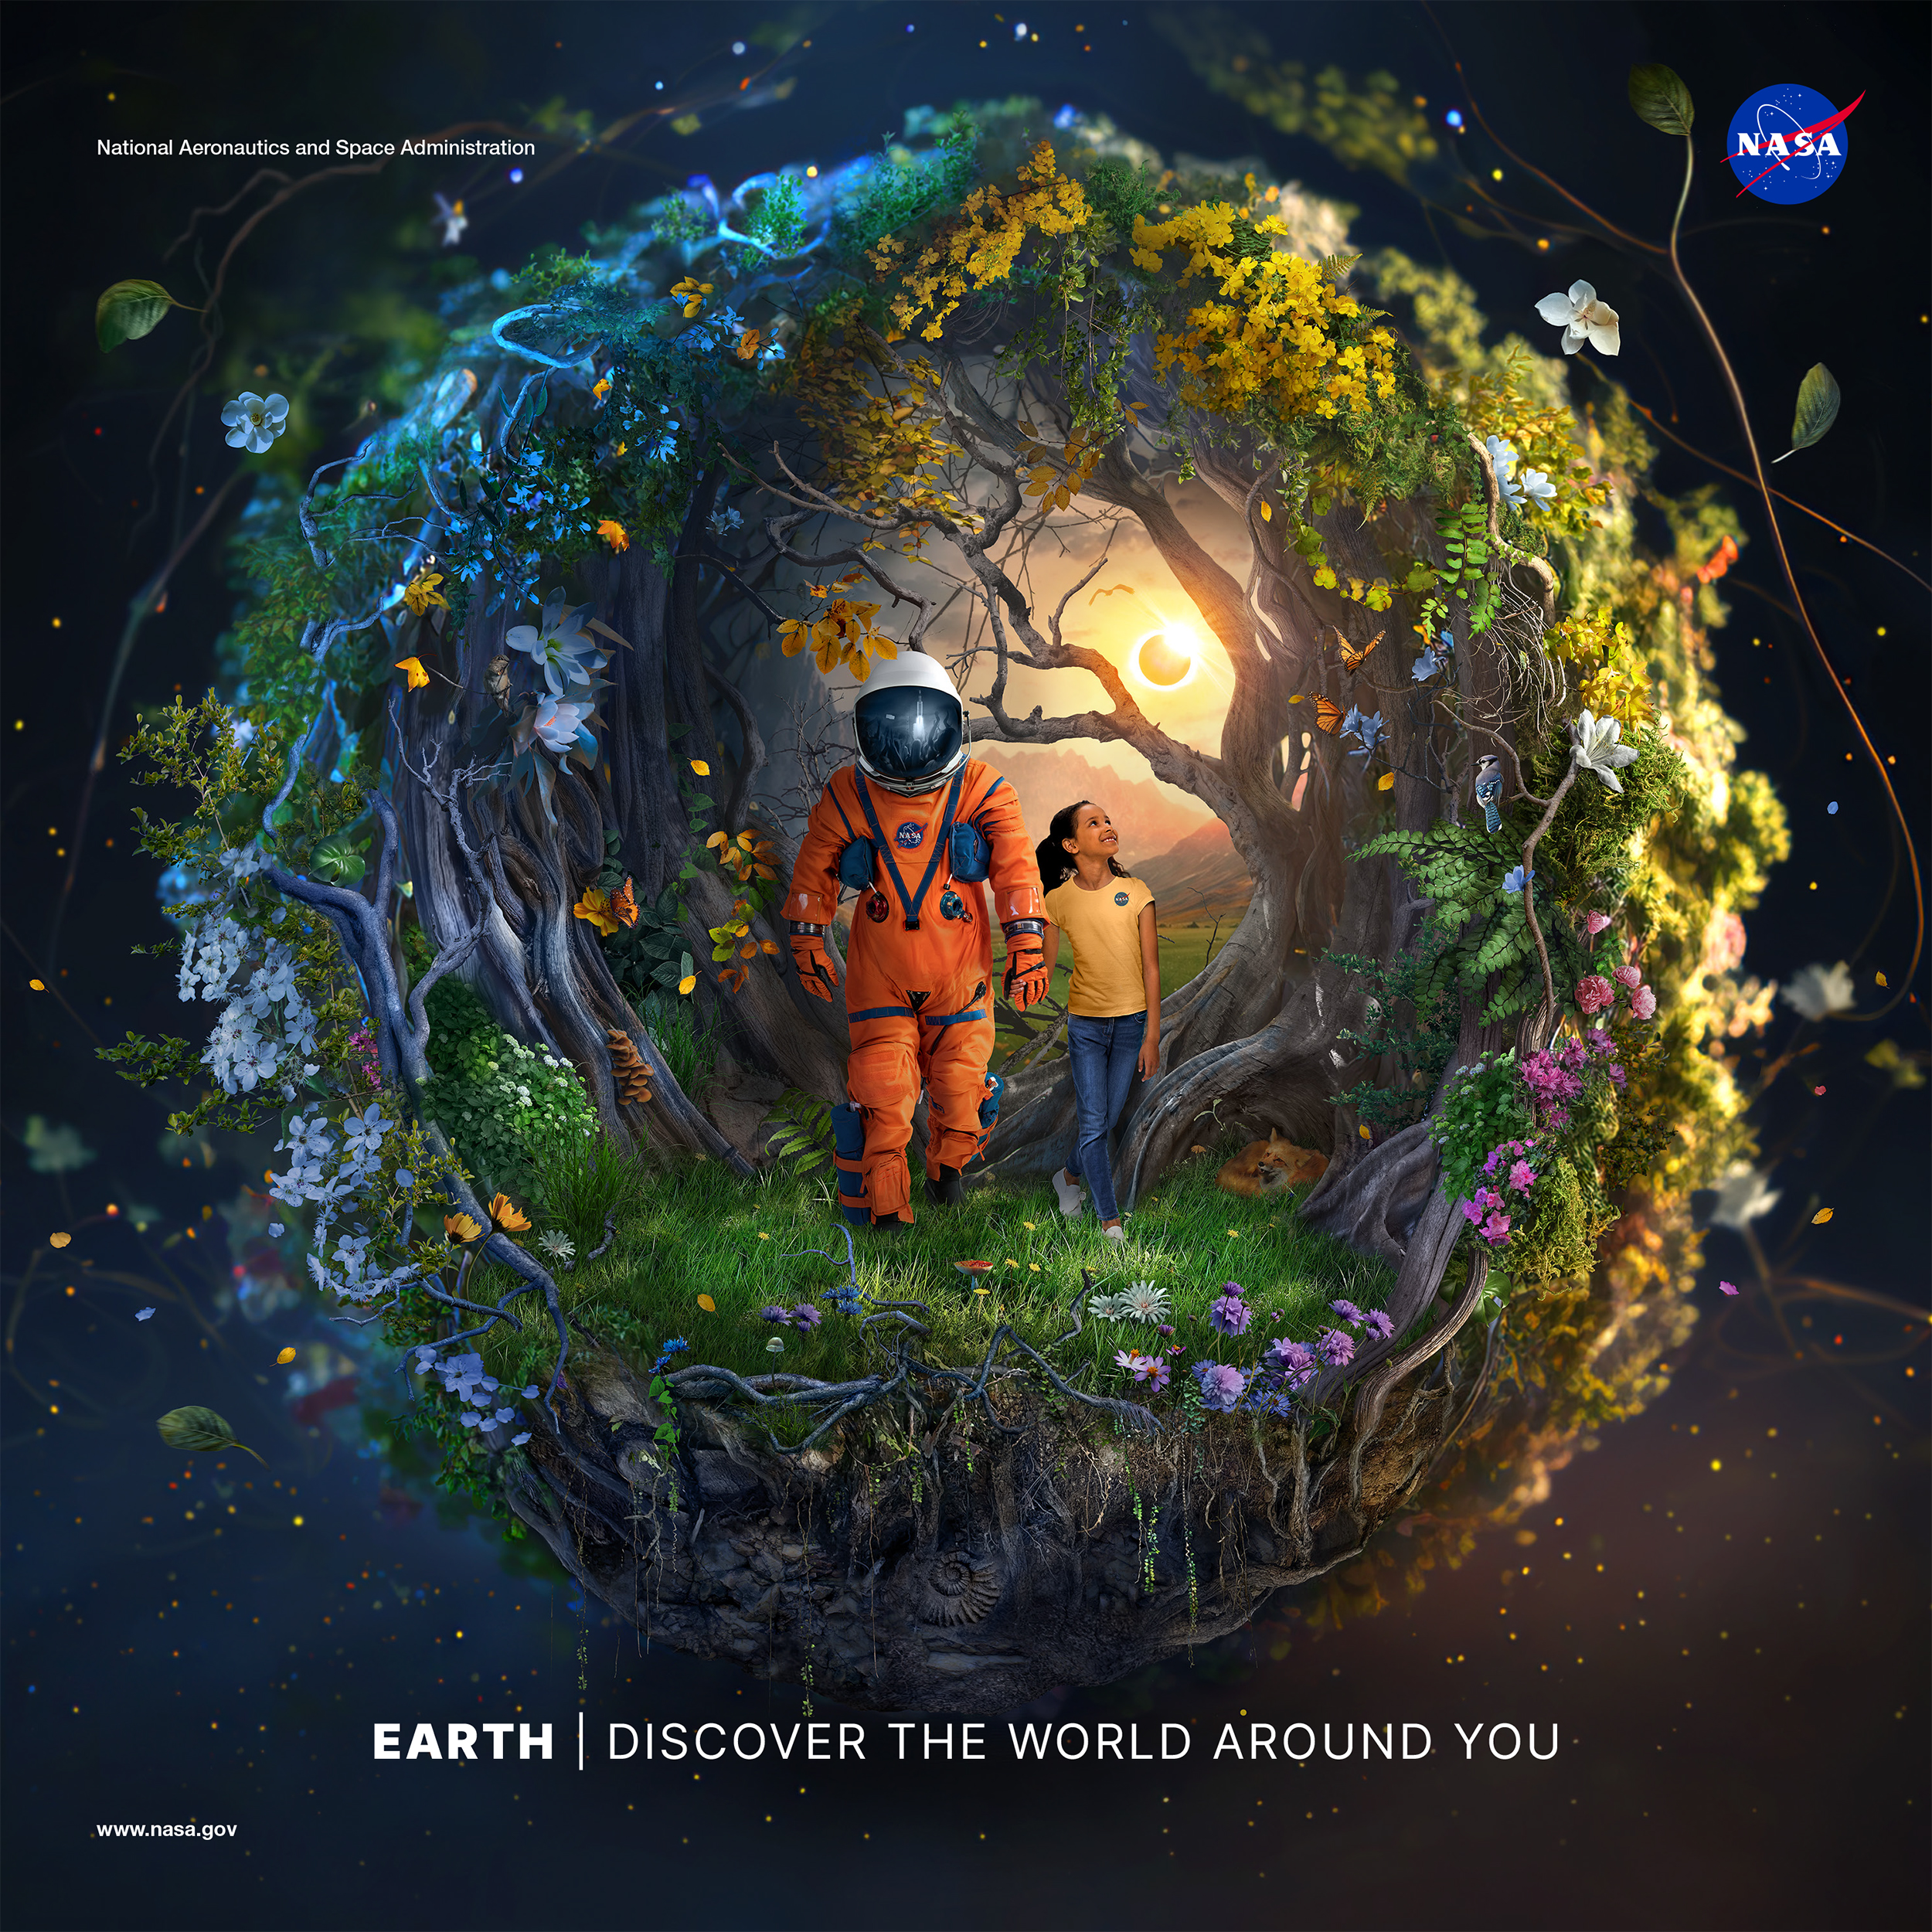 An artist’s concept featuring a colorful, sphere-like wreath composed of lush green trees, vines, flowers, and various plants and wildlife. The sphere floats in space with flower-petals and leaves drifting around like stars in the sky. In the center, an astronaut in an orange flight suit leads a little girl though a grassy clearing. The astronaut serves as a visual metaphor for NASA, leading the next generation of explores to discover the world around them. The Artemis 1 launch is reflected in the astronaut’s helmet. The little girl, who wears a yellow NASA shirt, looks around in amazement at the beauty surrounding her. She gazes at a couple of orange monarch butterflies, who perch on flowers nearby.  A fox looks on from under a tree, and birds watch from surrounding branches. A distant landscape can be seen beyond the clearing, with grassy fields and a hazy mountain range. An eclipse appears in the sky, alluding to the annular eclipse in October of 2023. 